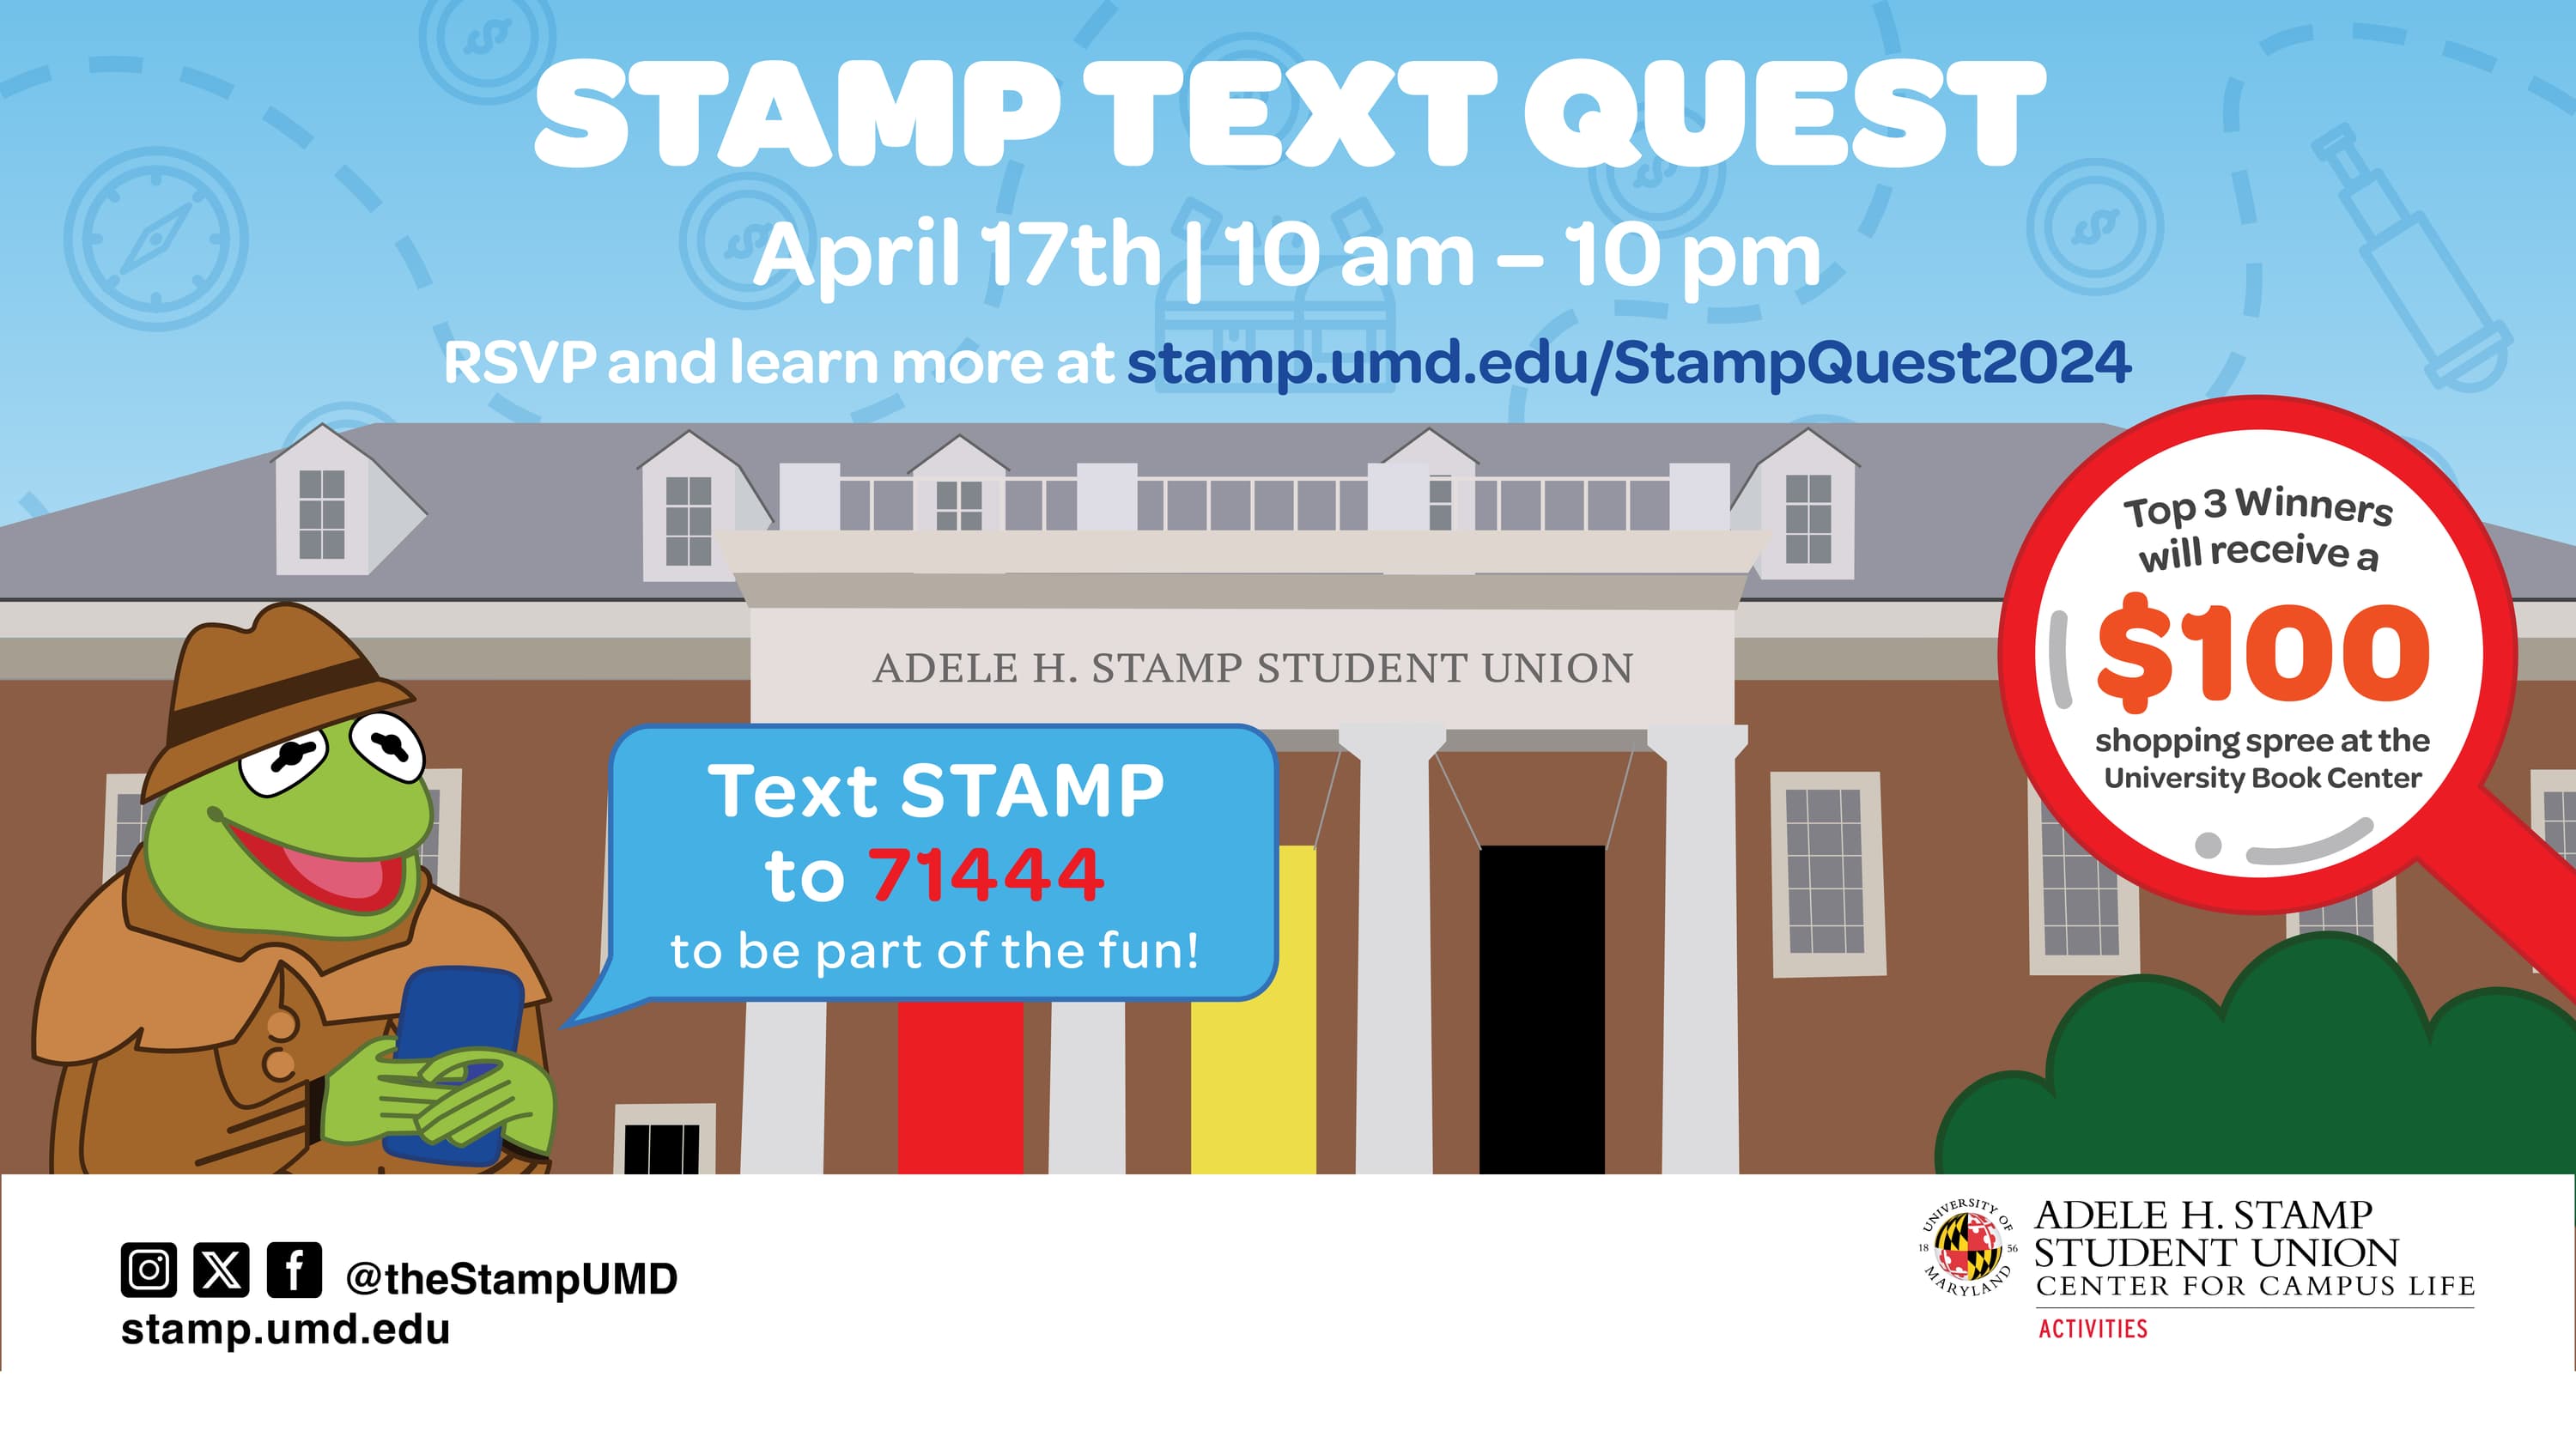 Stamp Text Quest flyer